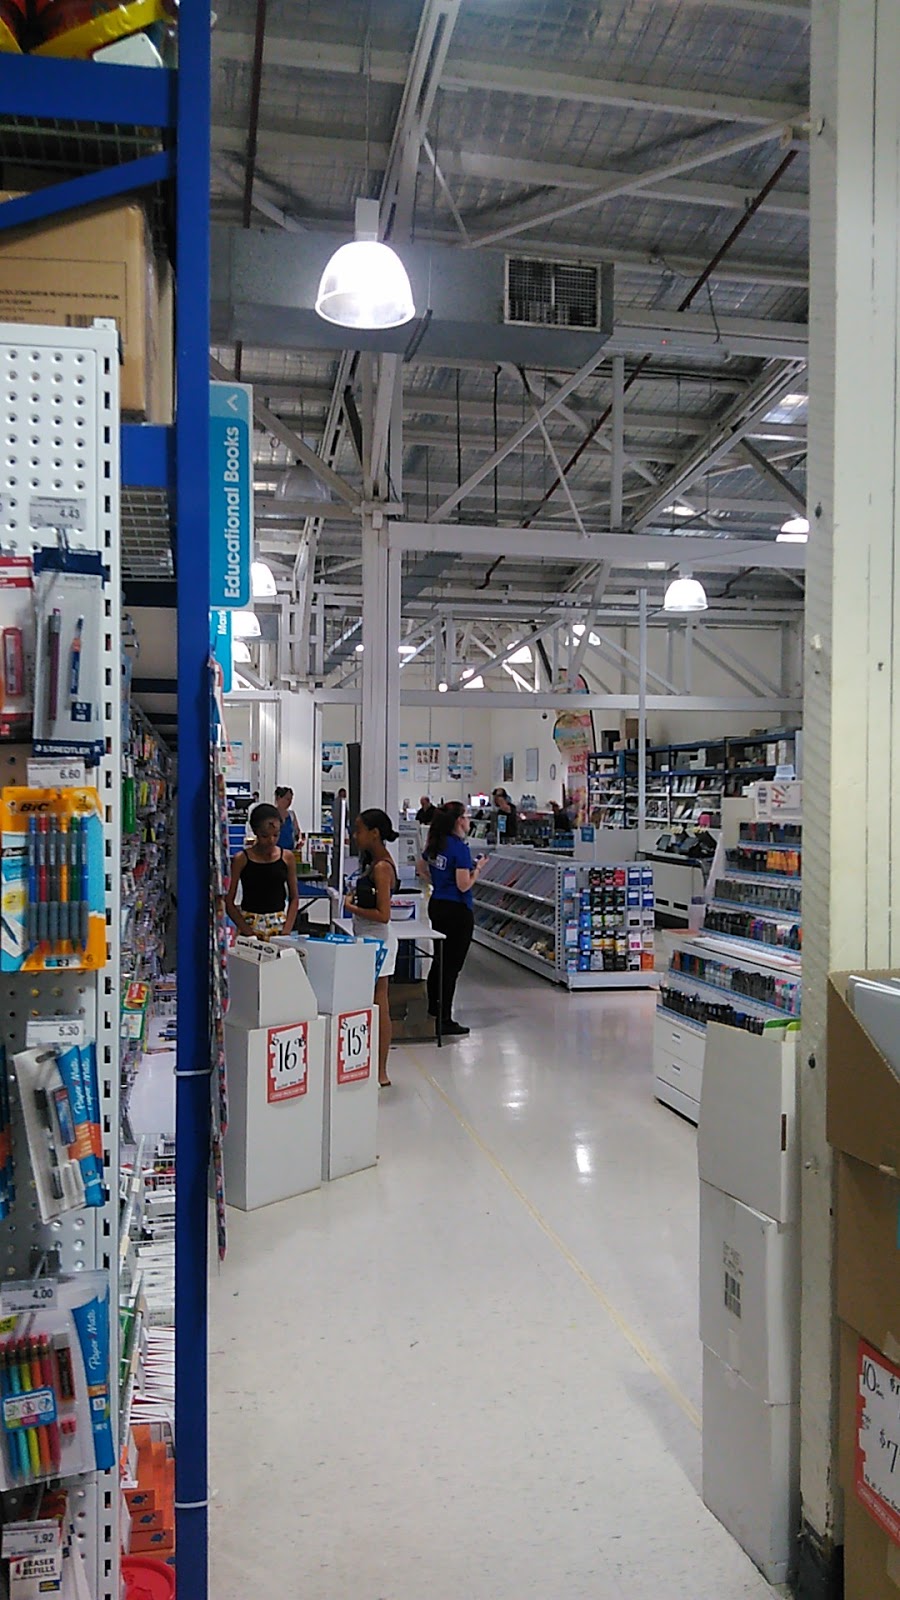 Officeworks Windsor | electronics store | 157 Newmarket Rd, Wilston QLD 4051, Australia | 0736374400 OR +61 7 3637 4400